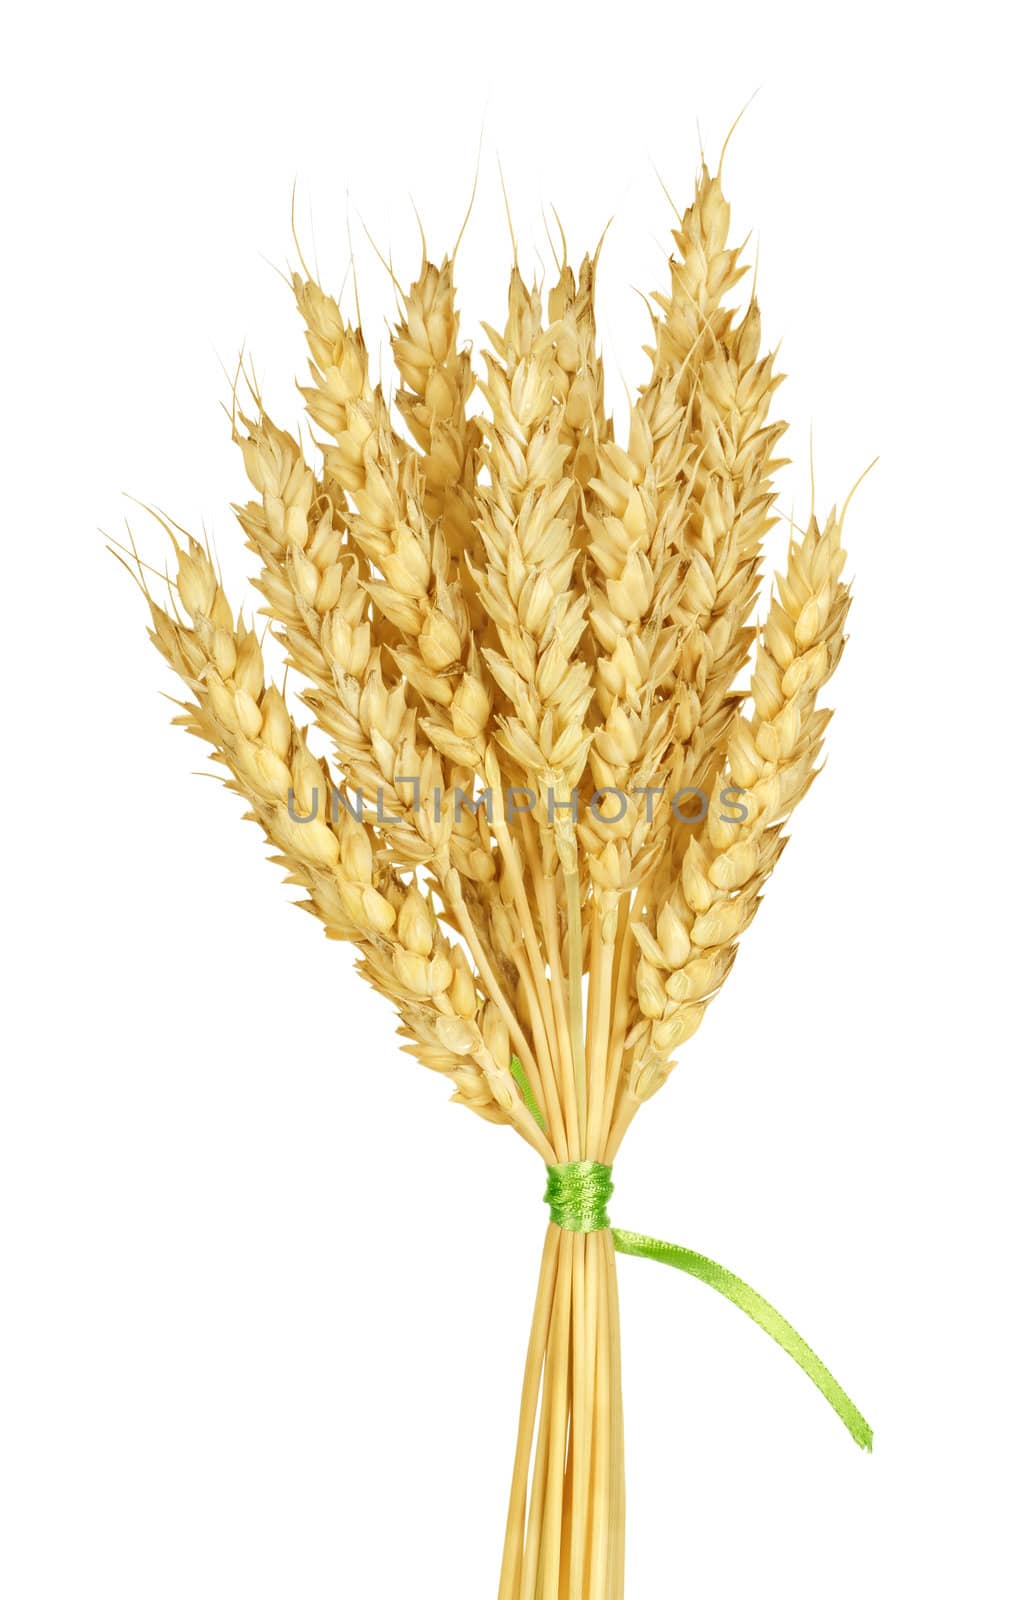 Wheat stems isolated on a white background